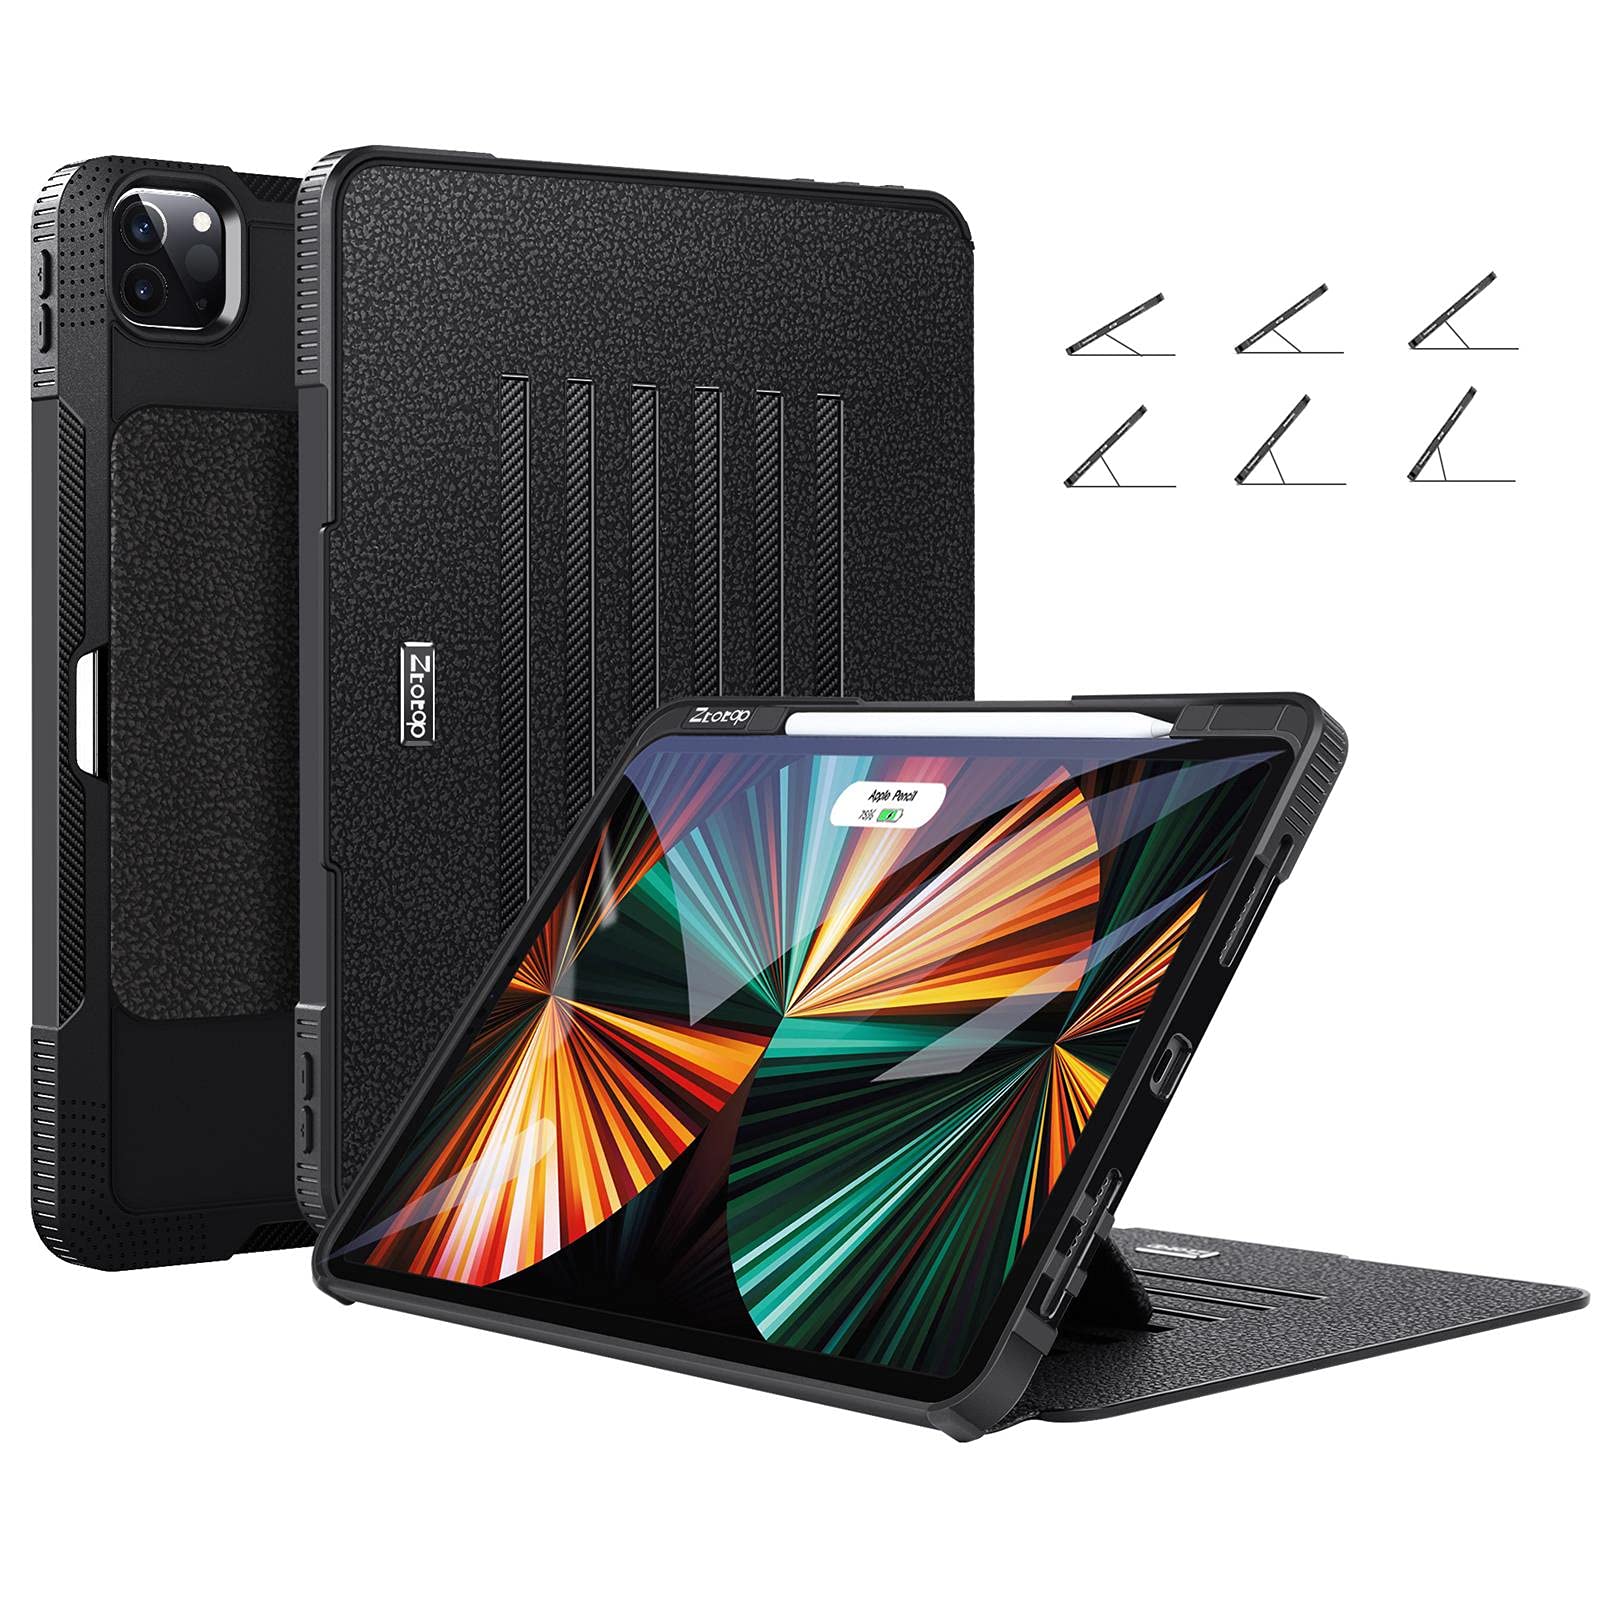 ZtotopCases for New iPad Pro 12.9 Inch Case 5th Generation 2021, [6 Magnetic Stand Angles] Full Body Highly Protective Cover with Pencil Holder, 2nd Gen Pencil Charging, Auto Wake/Sleep, Black